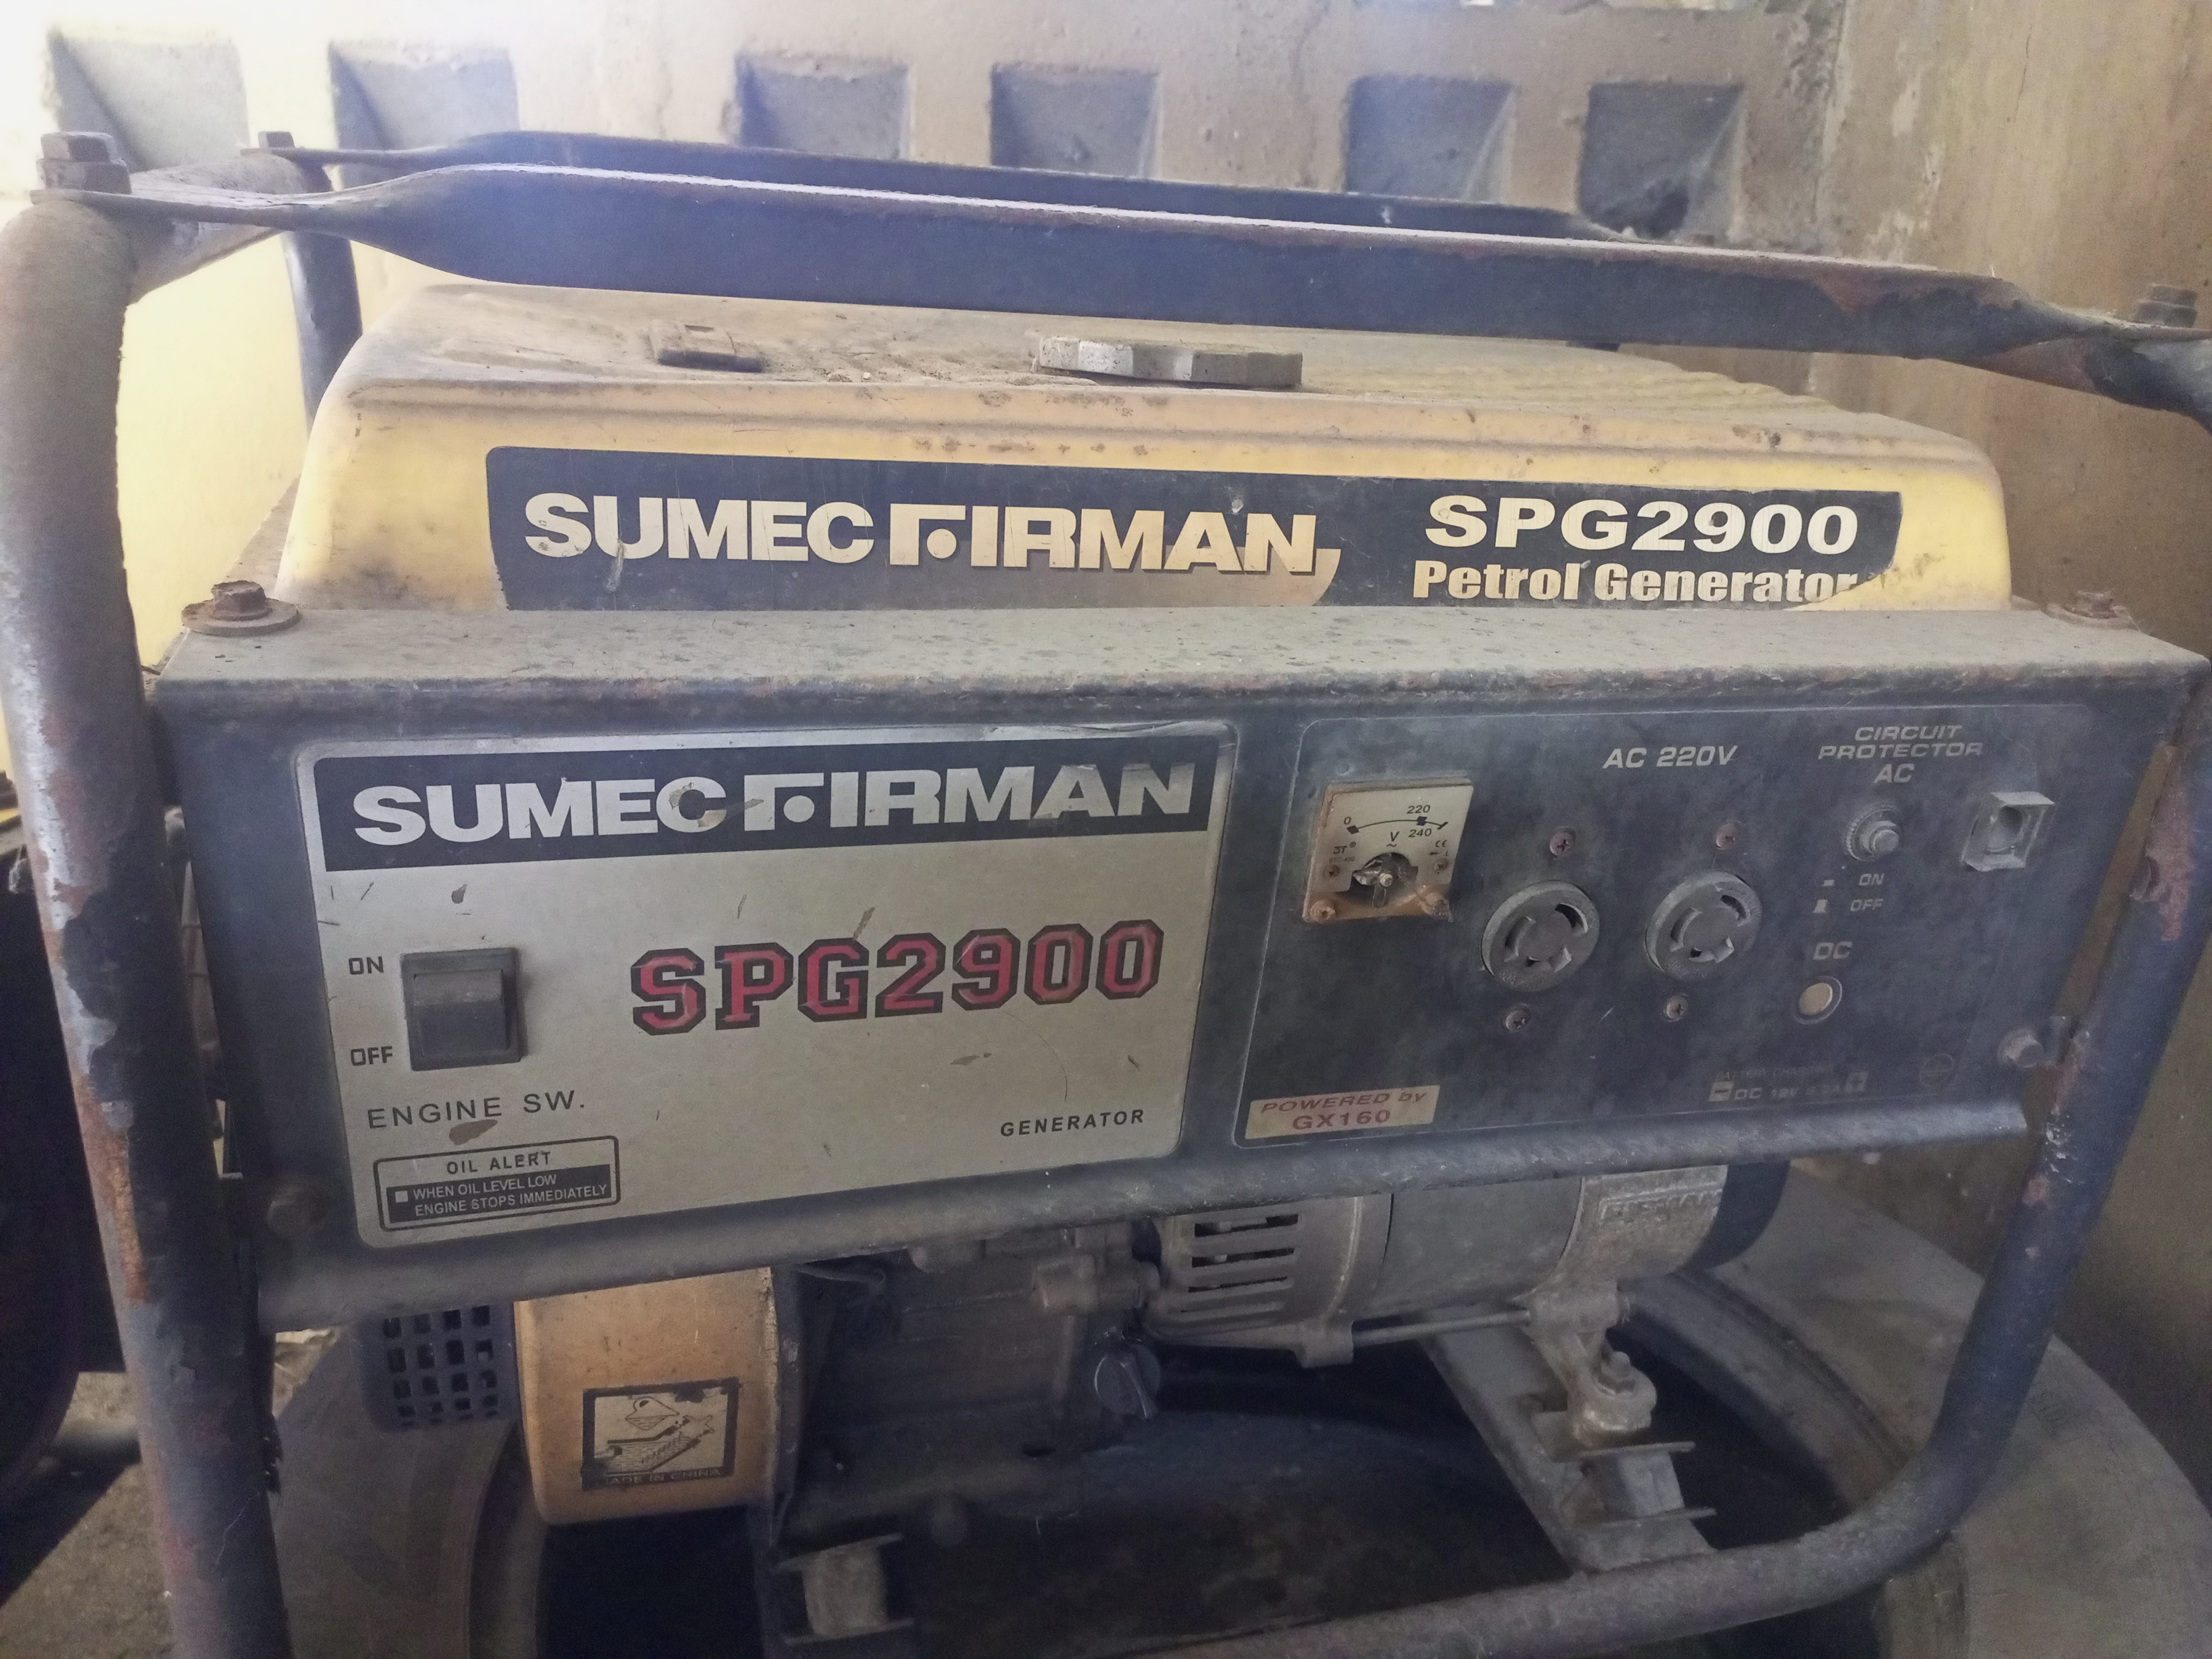 Repairable old generator for sale 